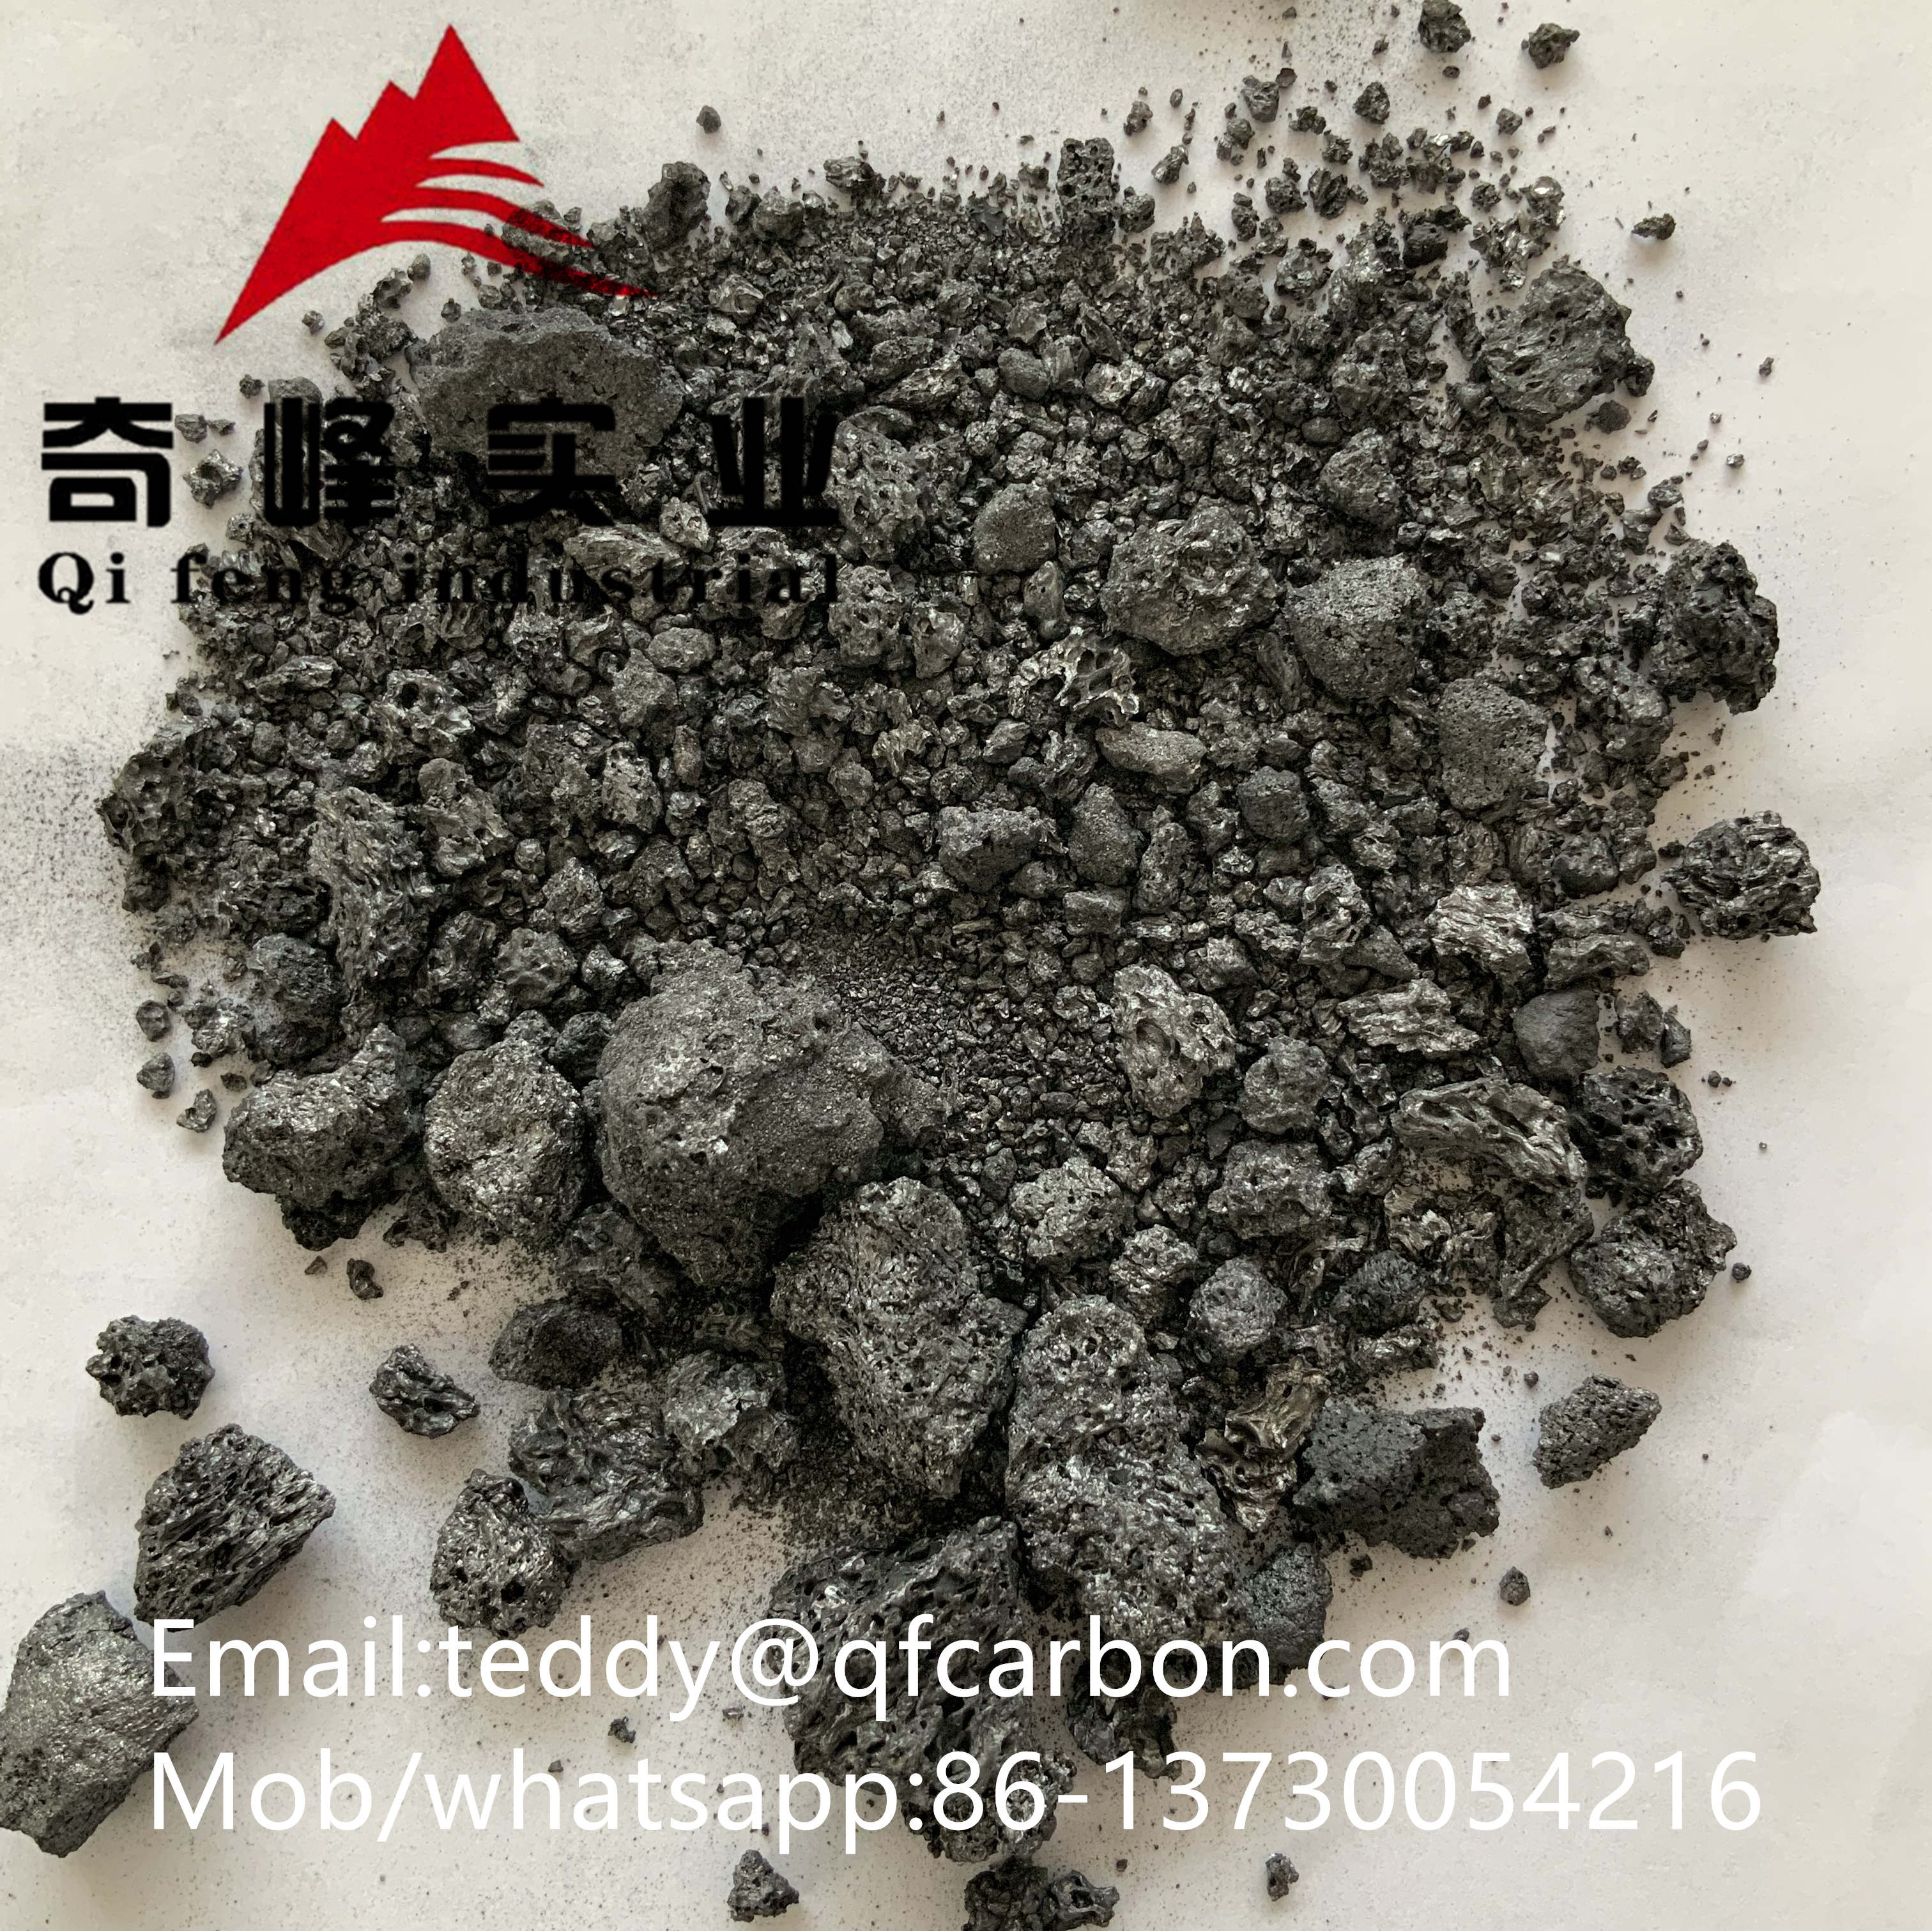 What is the use of calcined petroleum coke ?